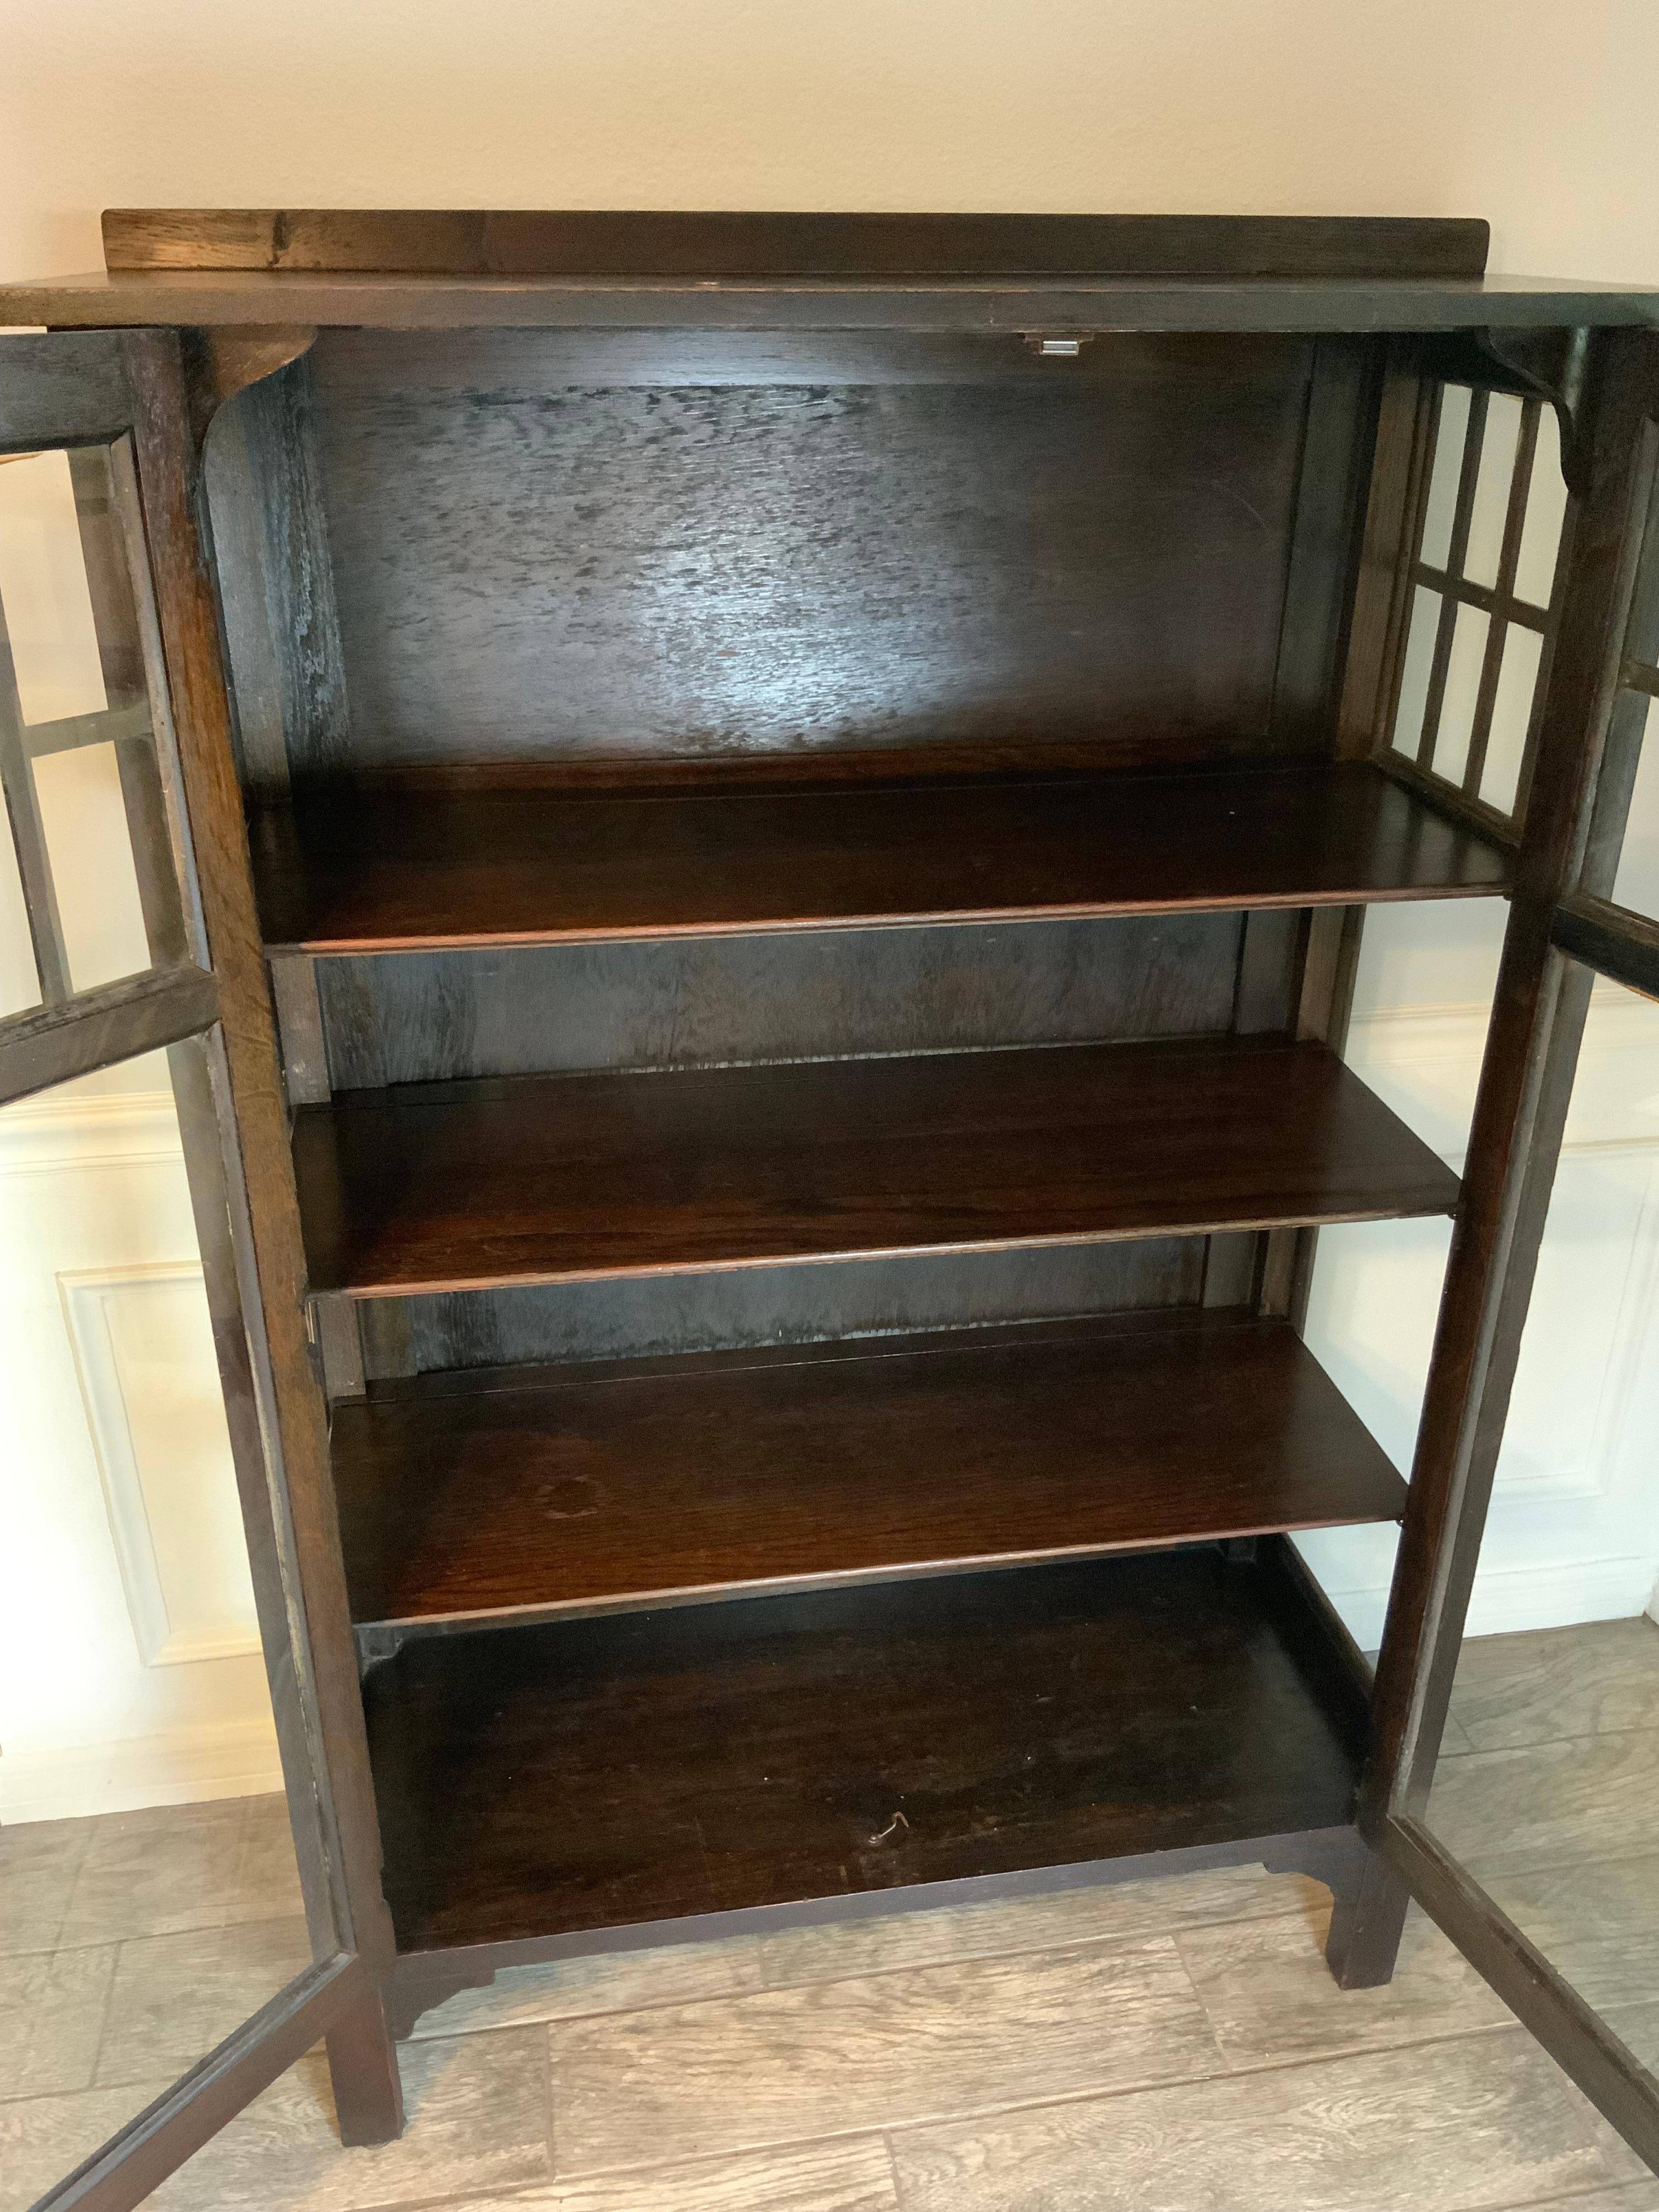 A very nice early 20th century Arts and Crafts quarter sawn Oak double door bookcase.  One pane of glass on the side is a later replacement, all others are the original wavy glass.  Original dry varnish surface with an excellent color and patina.